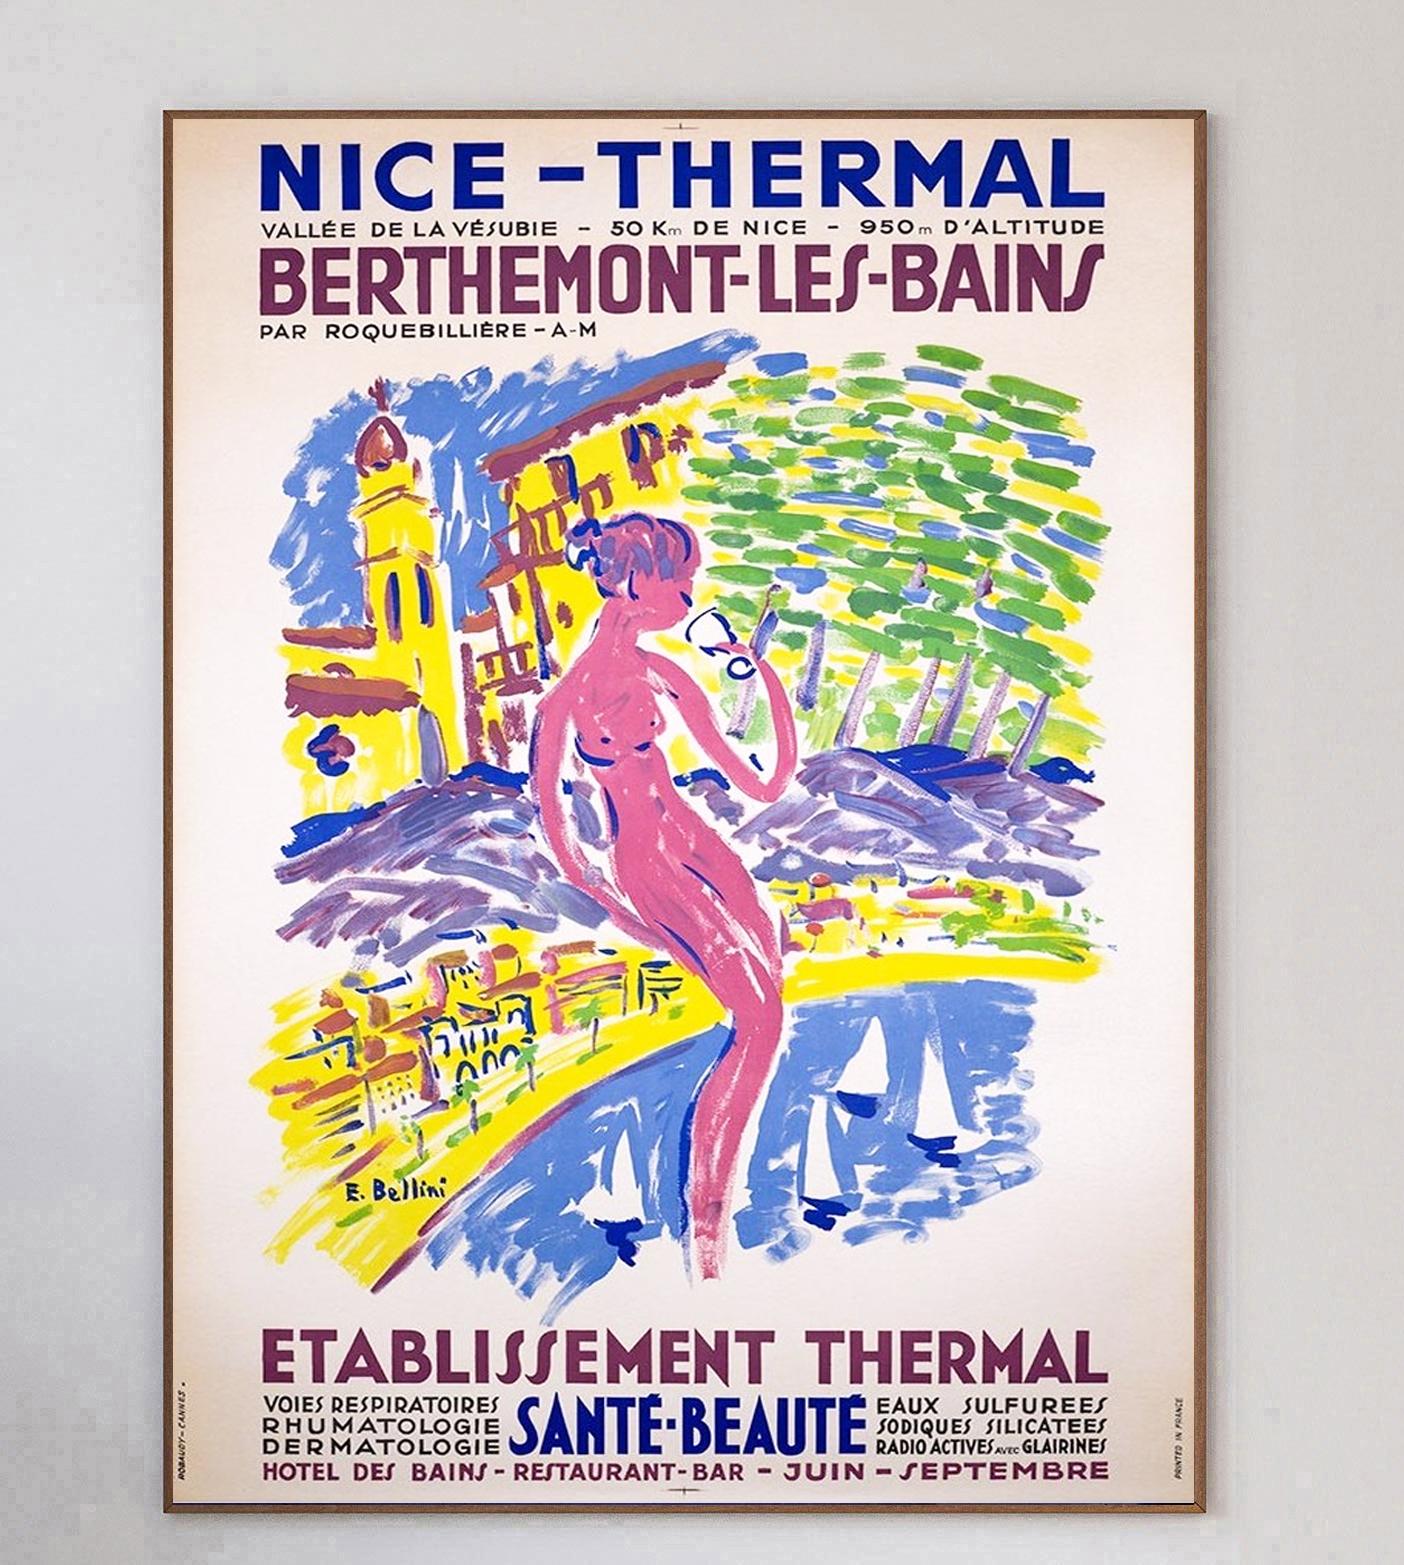 Beautiful poster from 1960 promoting the thermal spas of Berthemont-Les-Bains in Nice in the South of France. The spa was open from June to September and saw guests visit to help with all sorts of health issues and for general relaxation purposes.